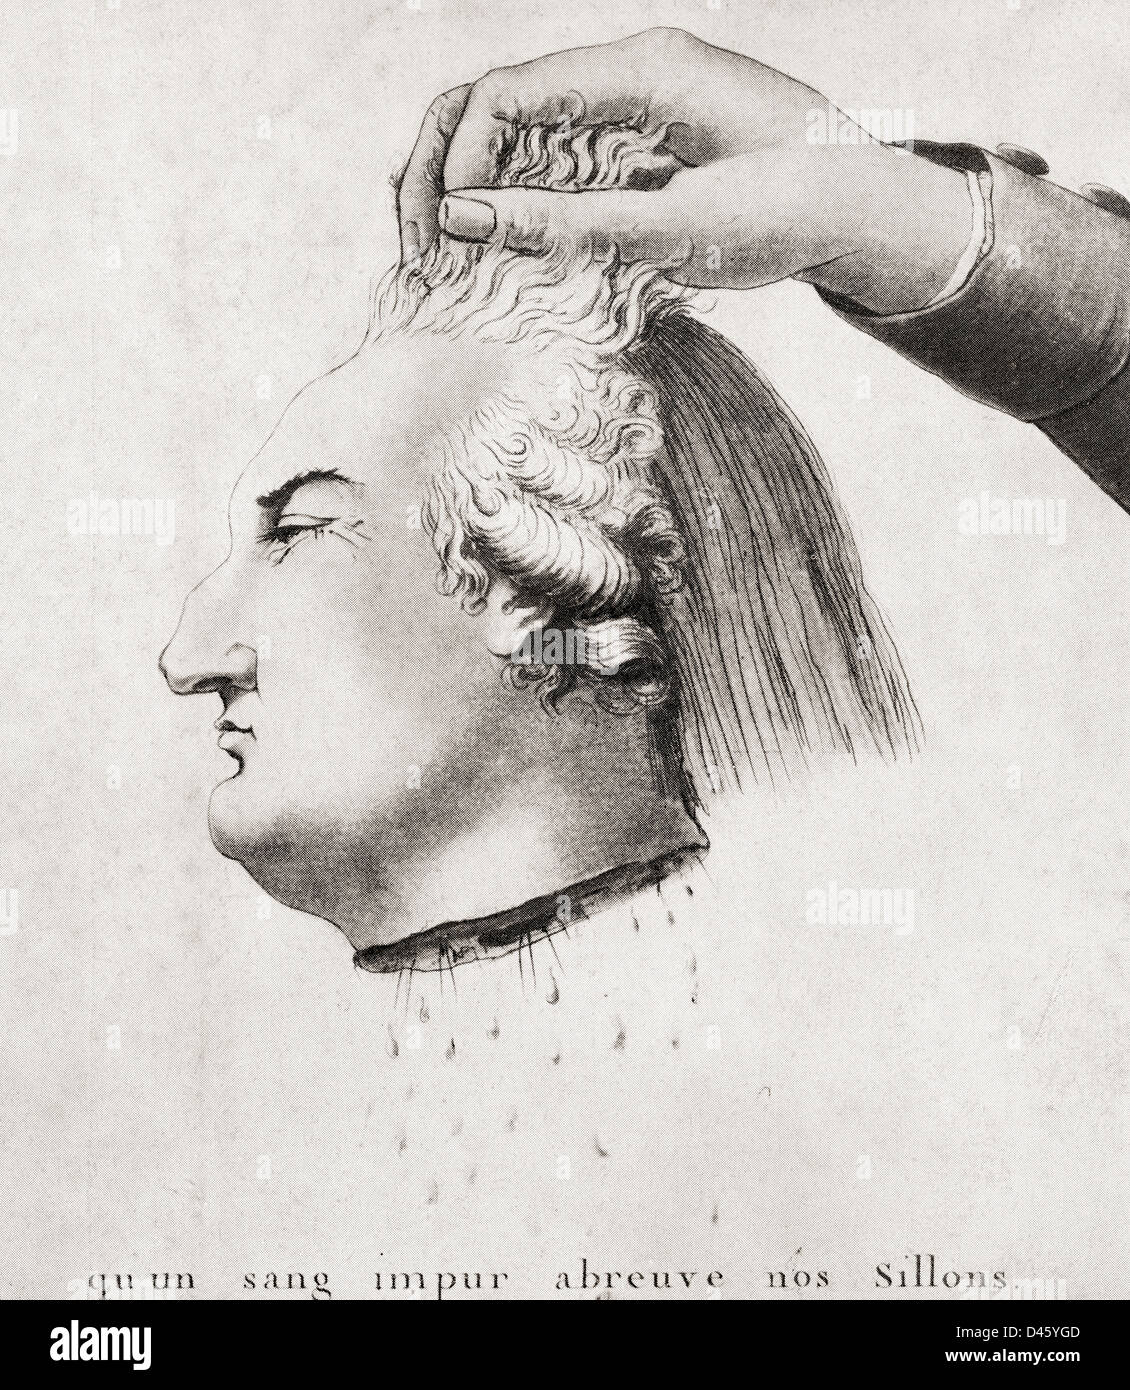 Cartoon from the era of the French Revolution showing a hand holding the decapitated head of Louis XVI. Stock Photo